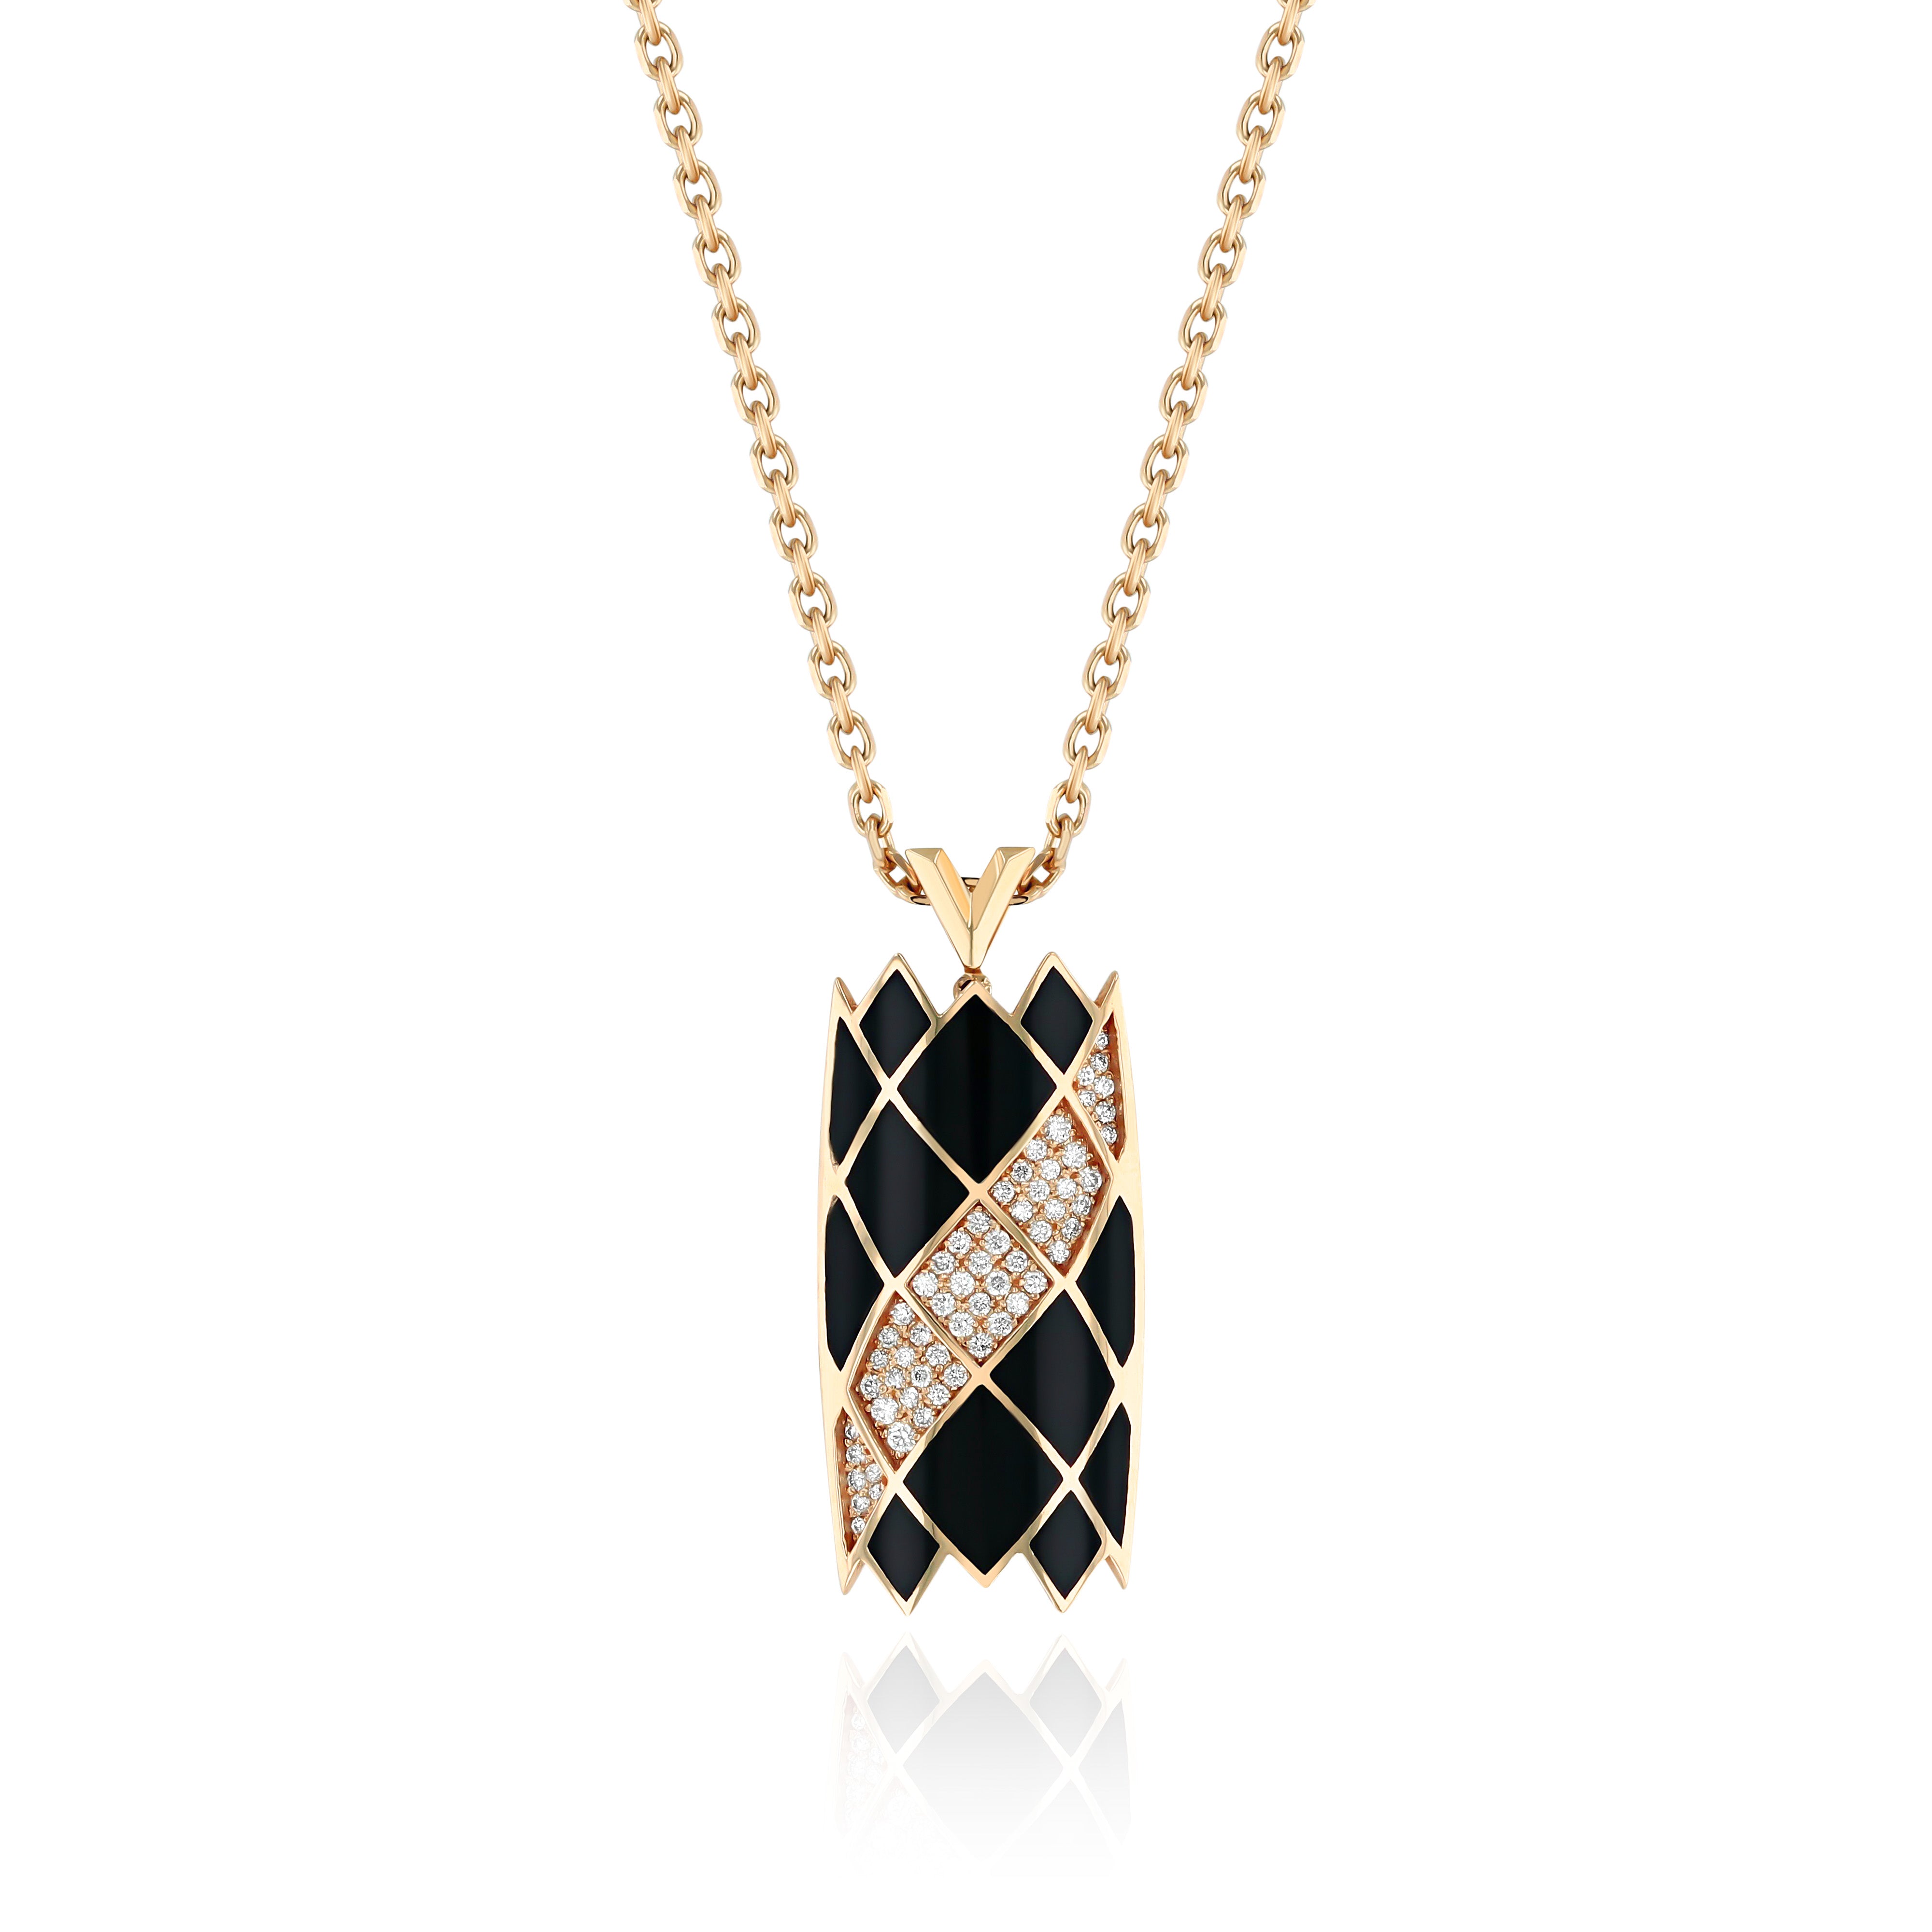 Yellow Gold Necklace with patterned Black Onyx and small round Diamonds, Medium